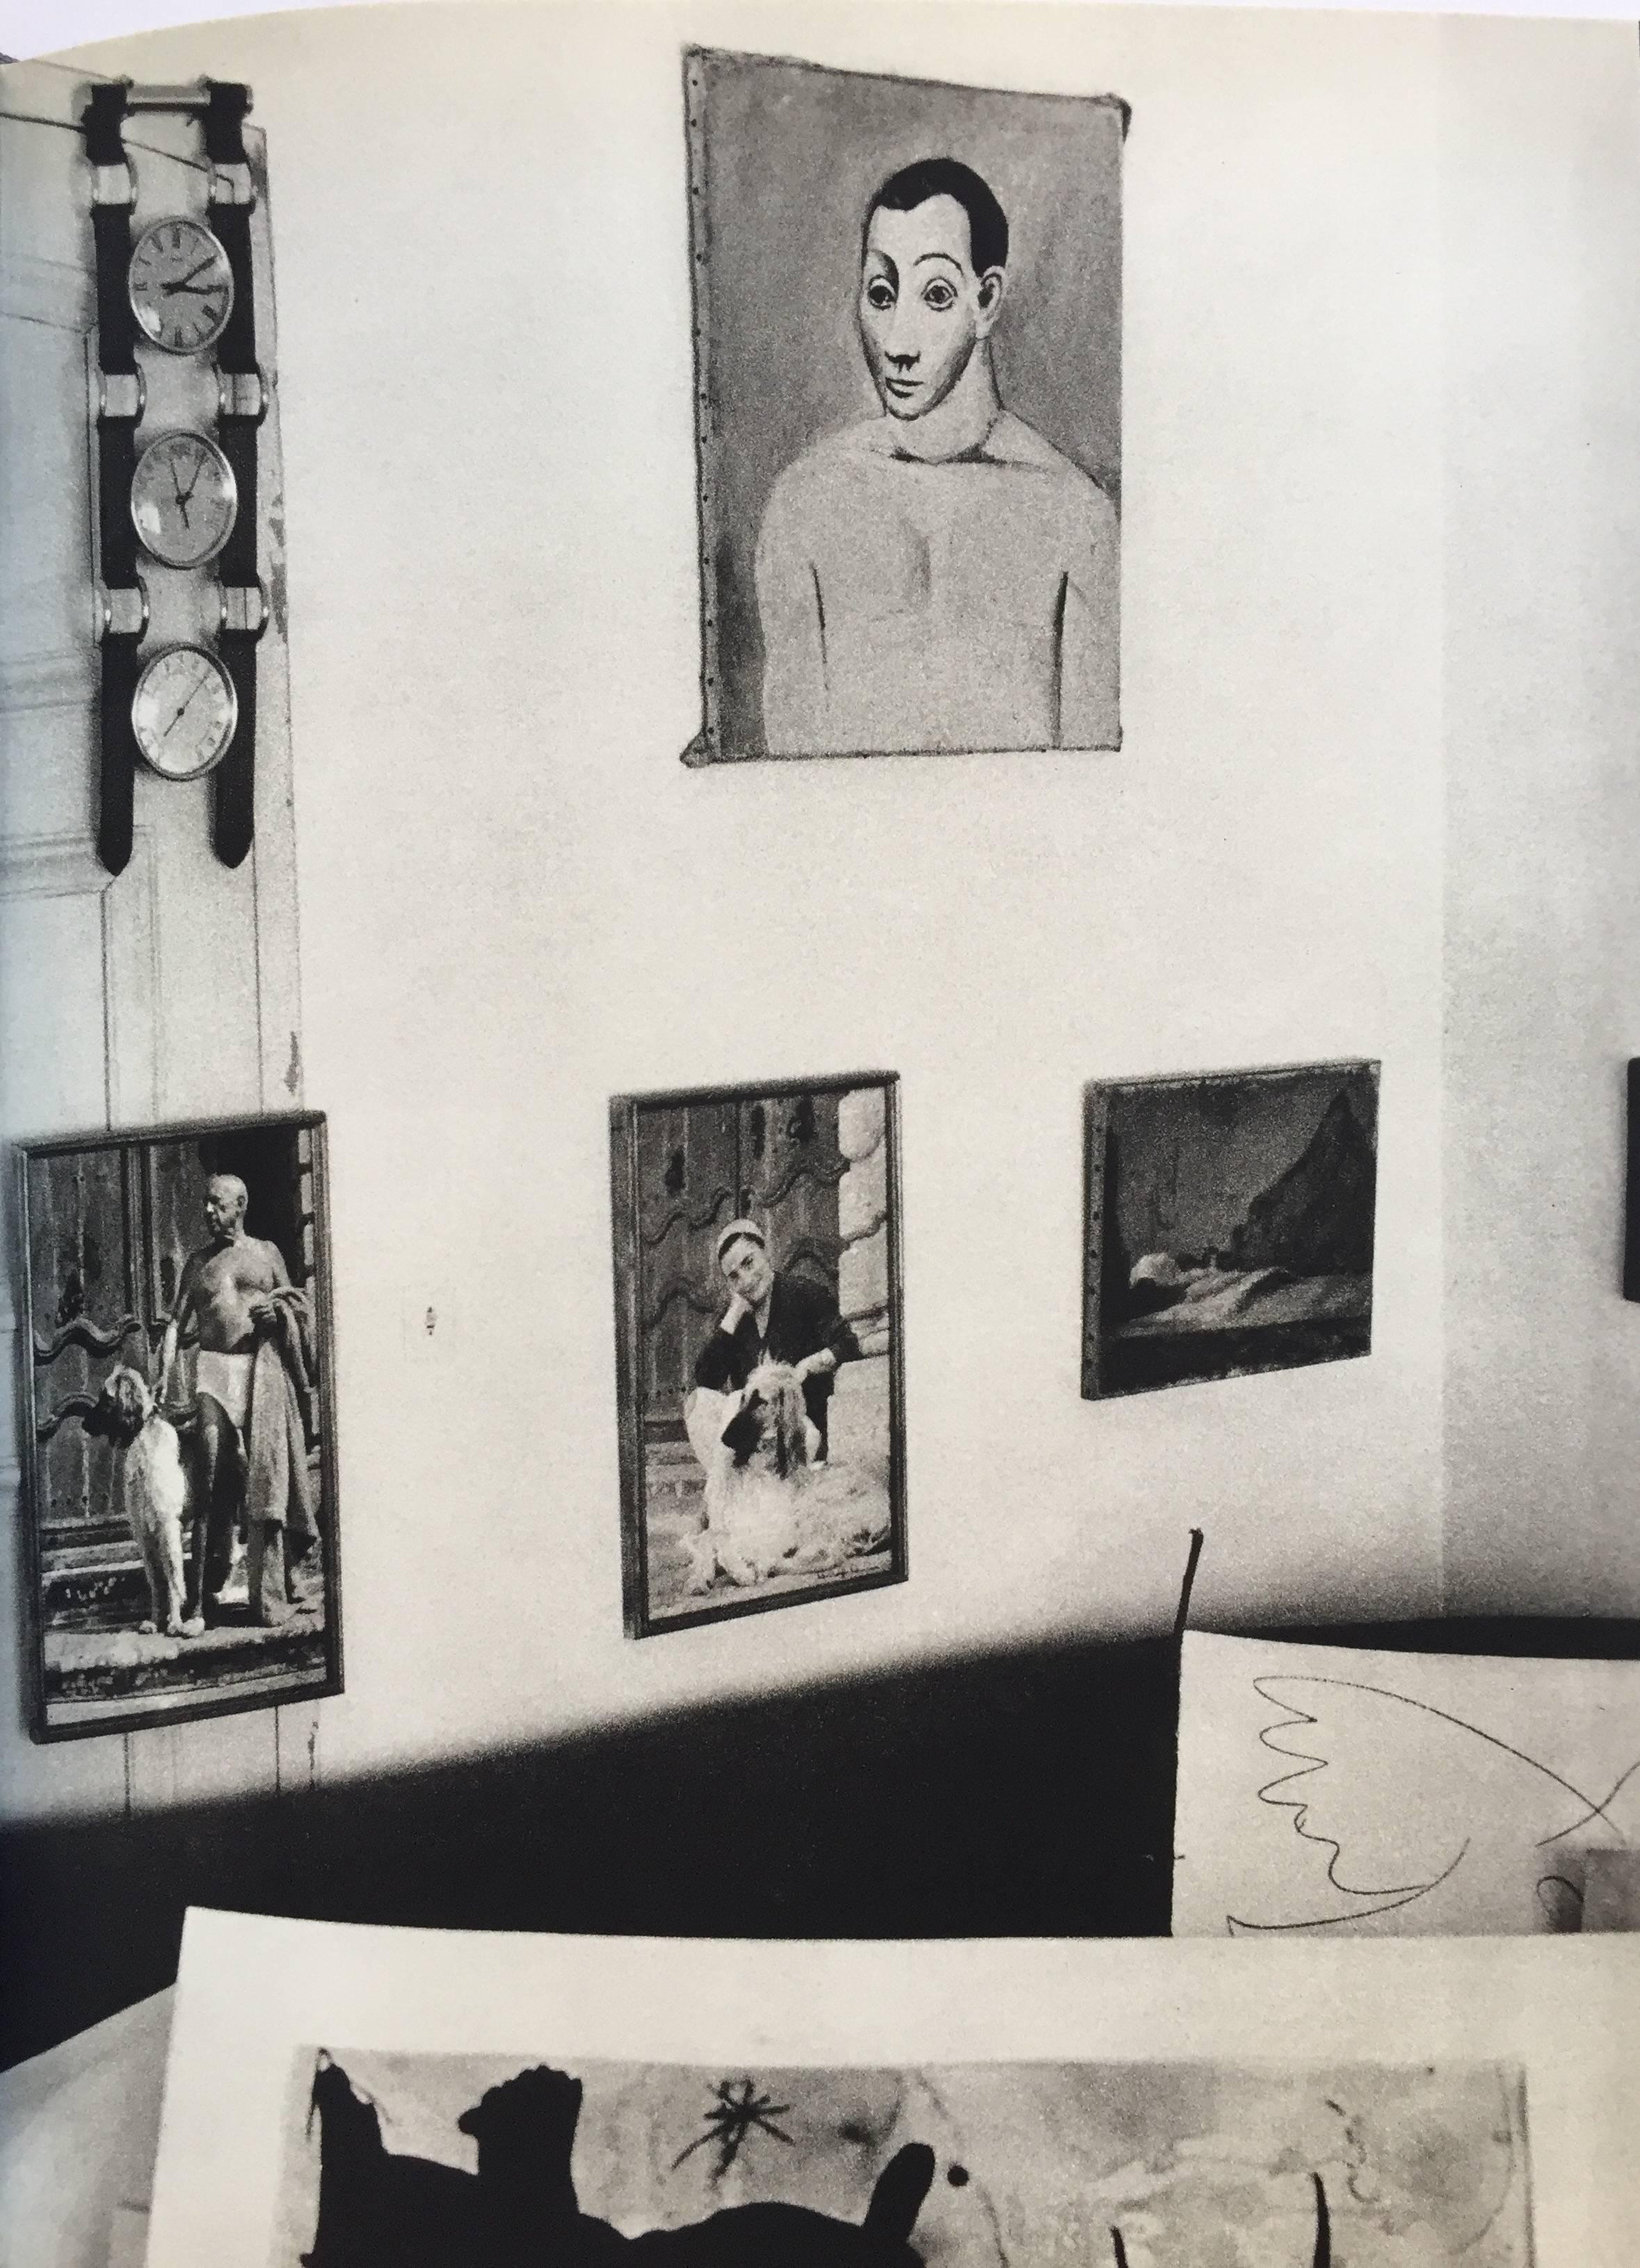 Paper Silent Studio, Picasso's Death First Edition, 1976